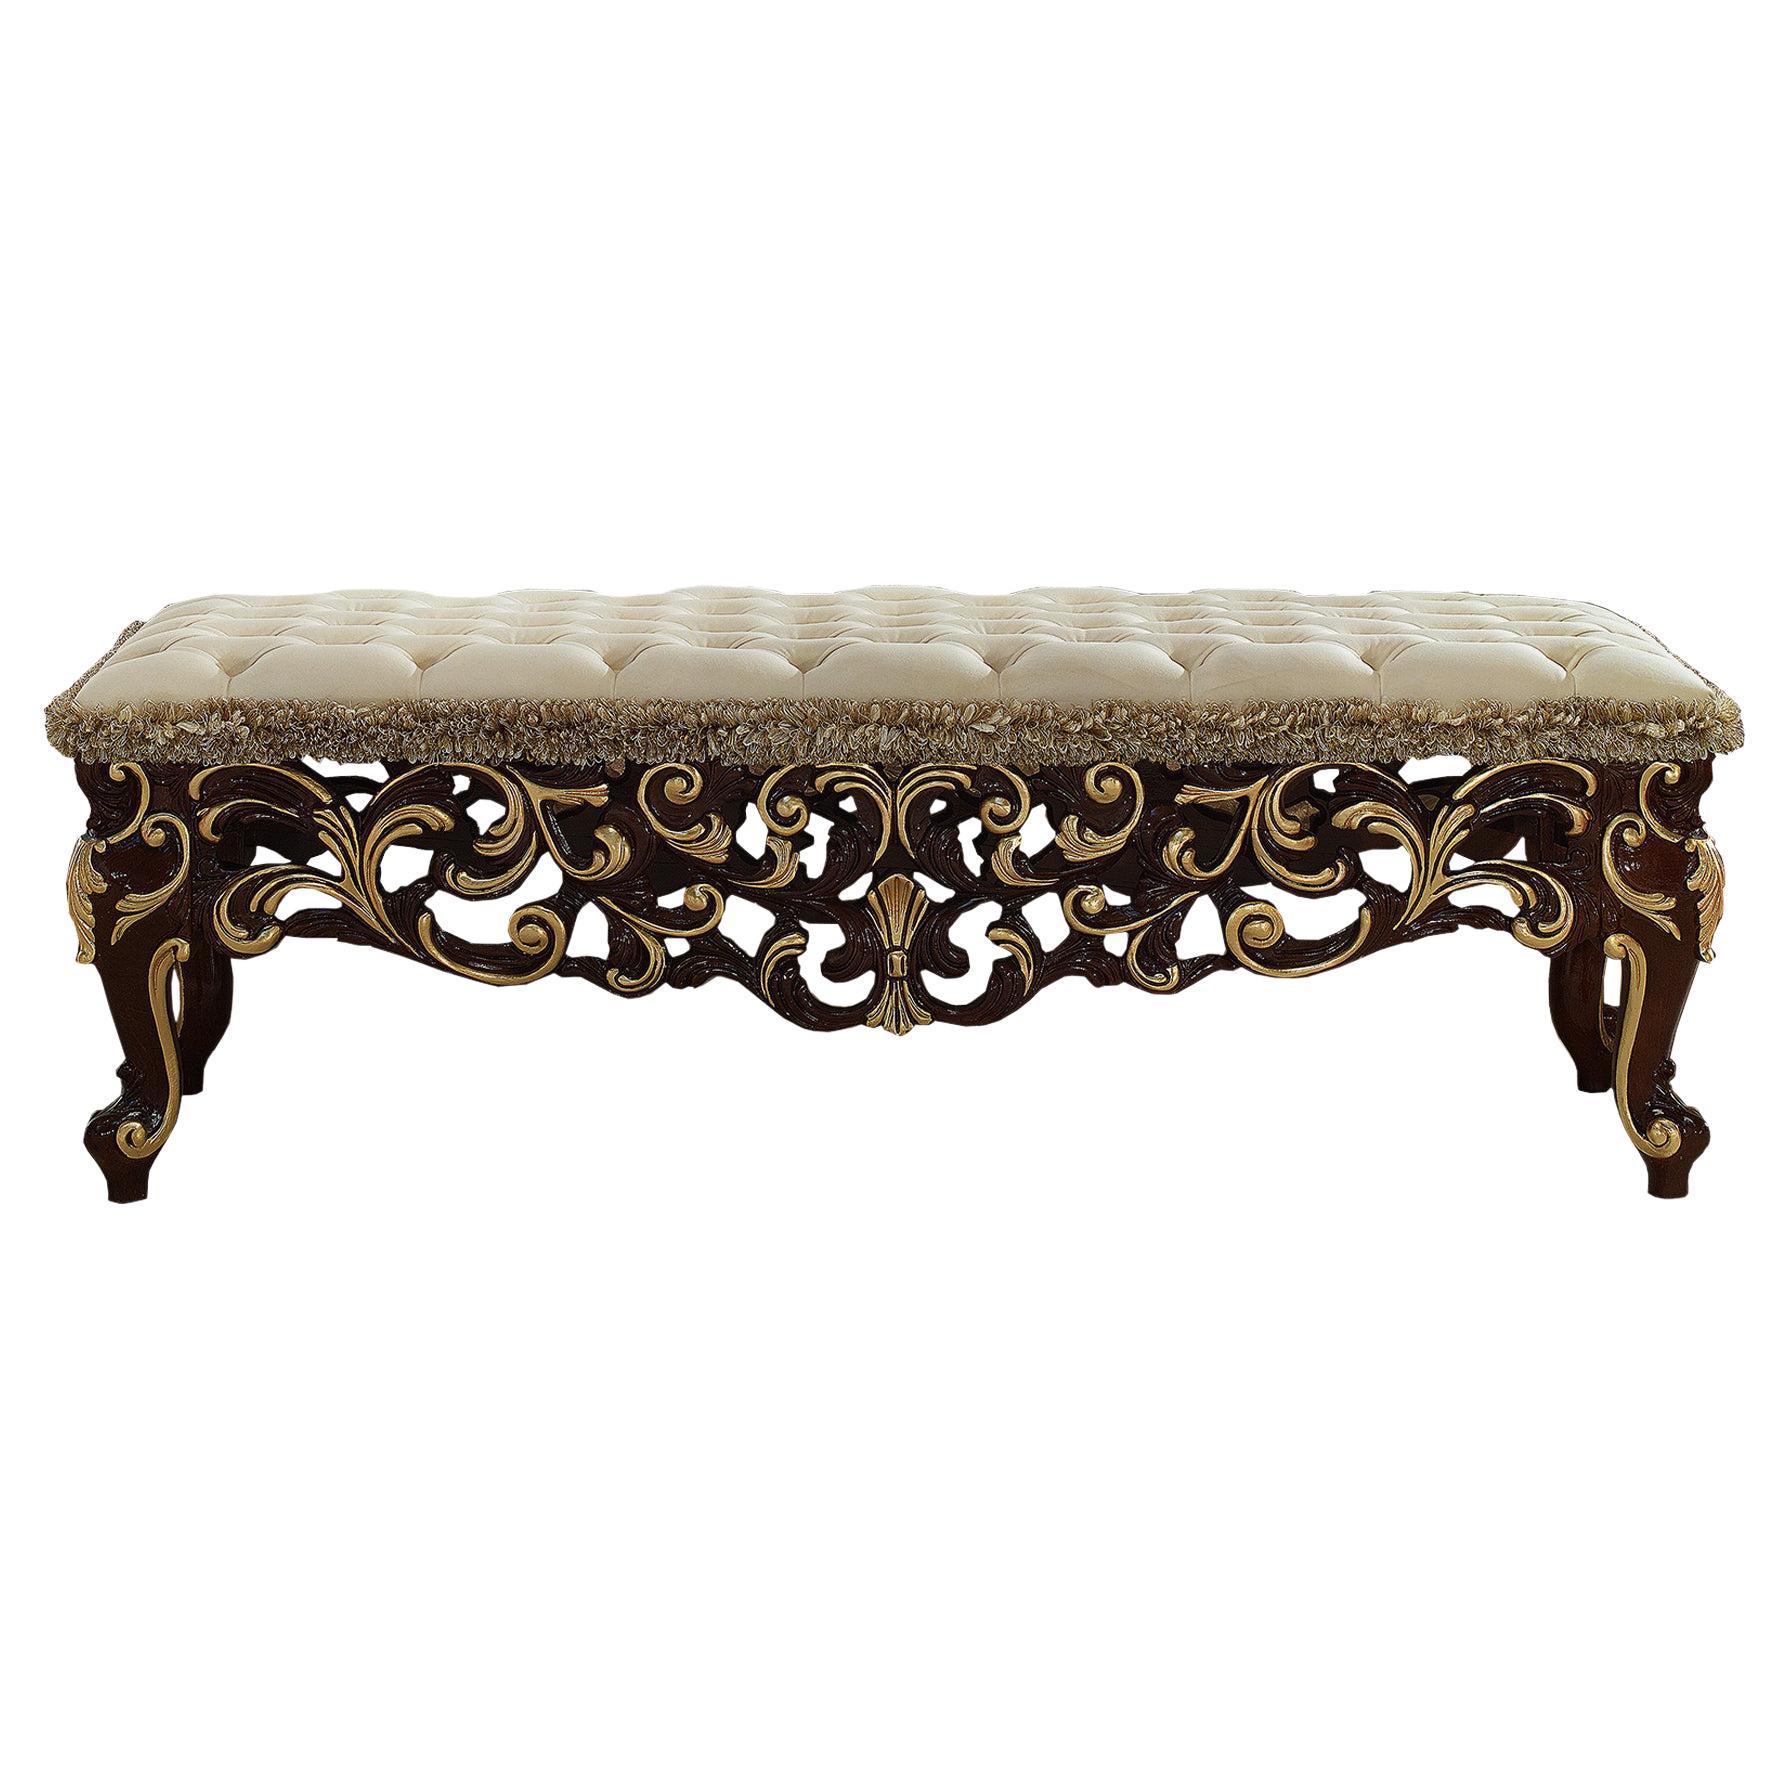 21st Century Rococo-Inspired Handcarved Bed Bench by Modenese Interiors